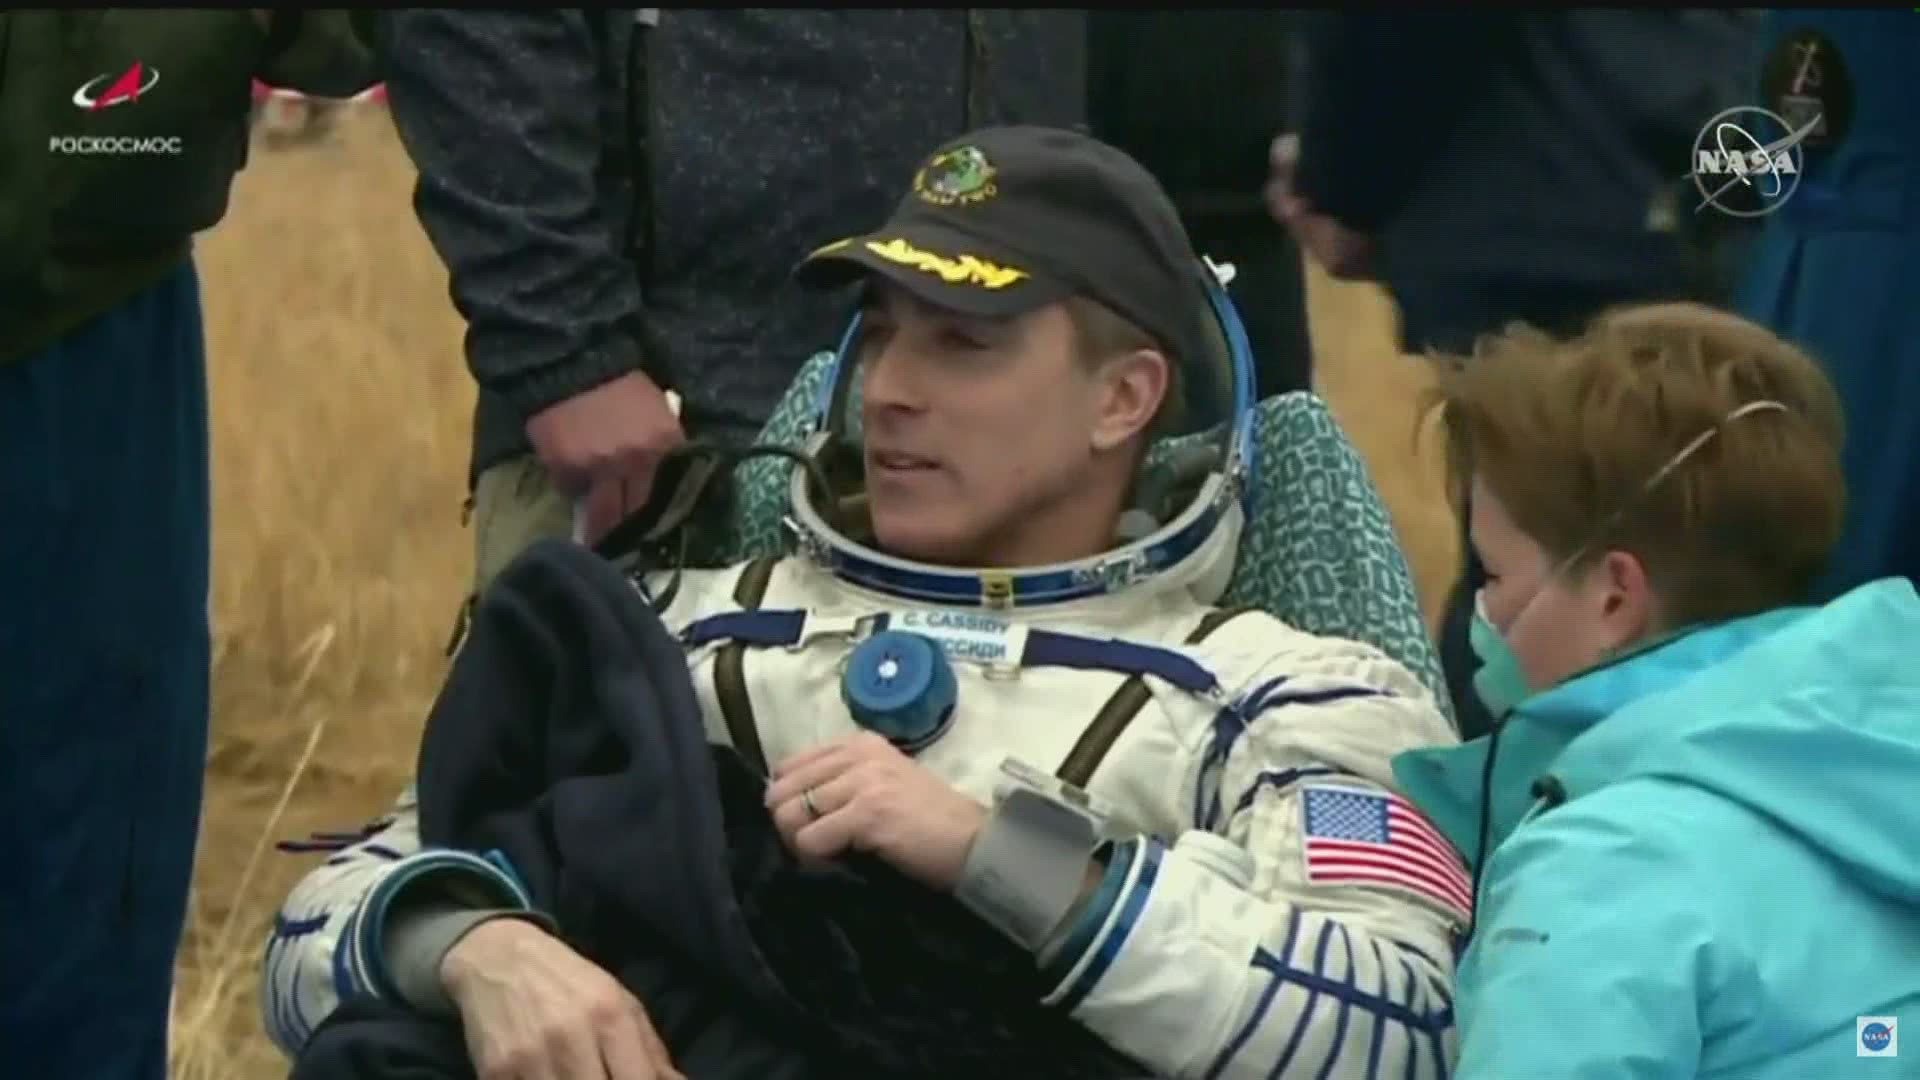 Chris Cassidy returns to earth after 196 days in space